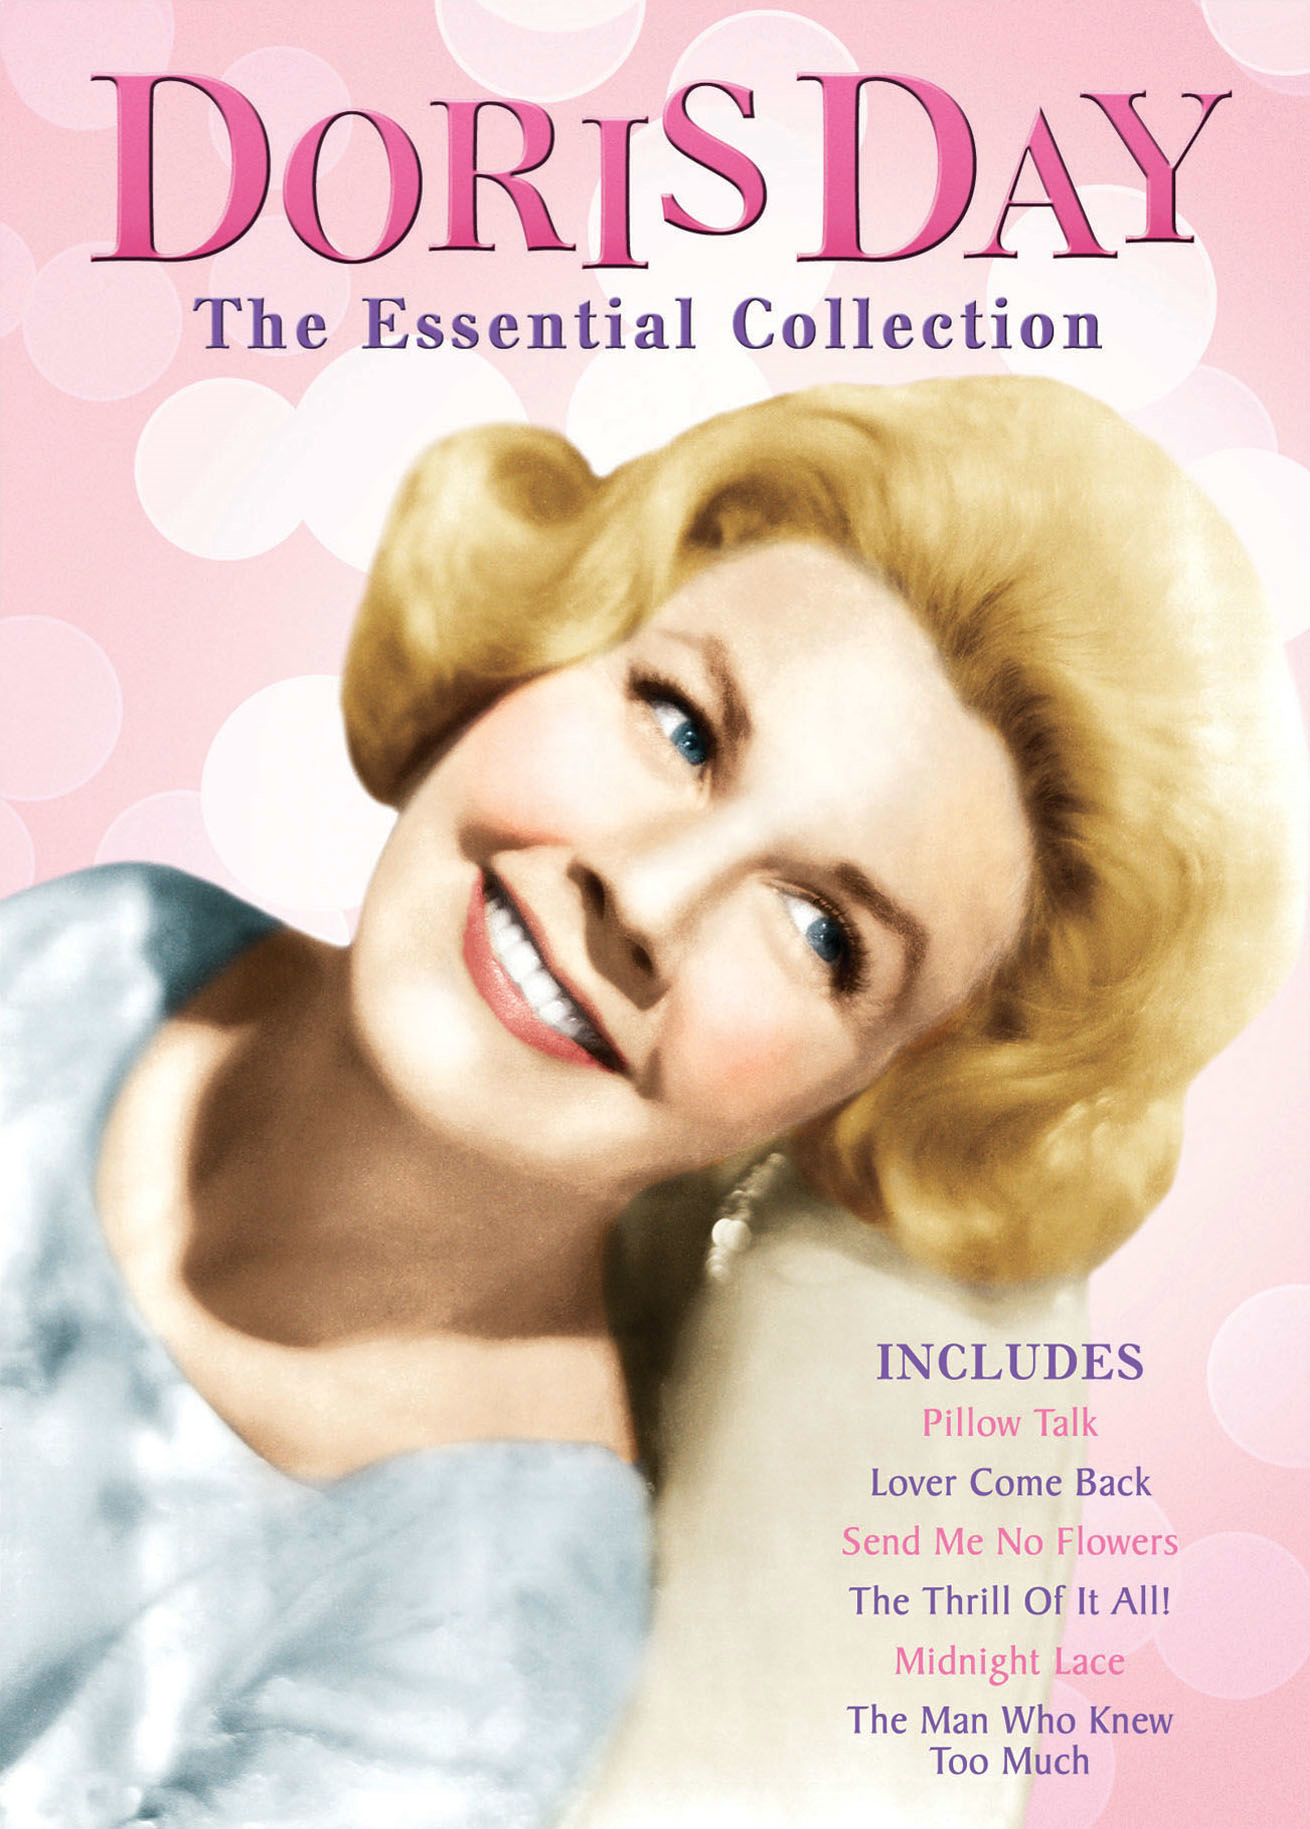 Doris Day: The Essential Collection (DVD Set) - DVD   - Classic Movies On DVD - Movies On GRUV